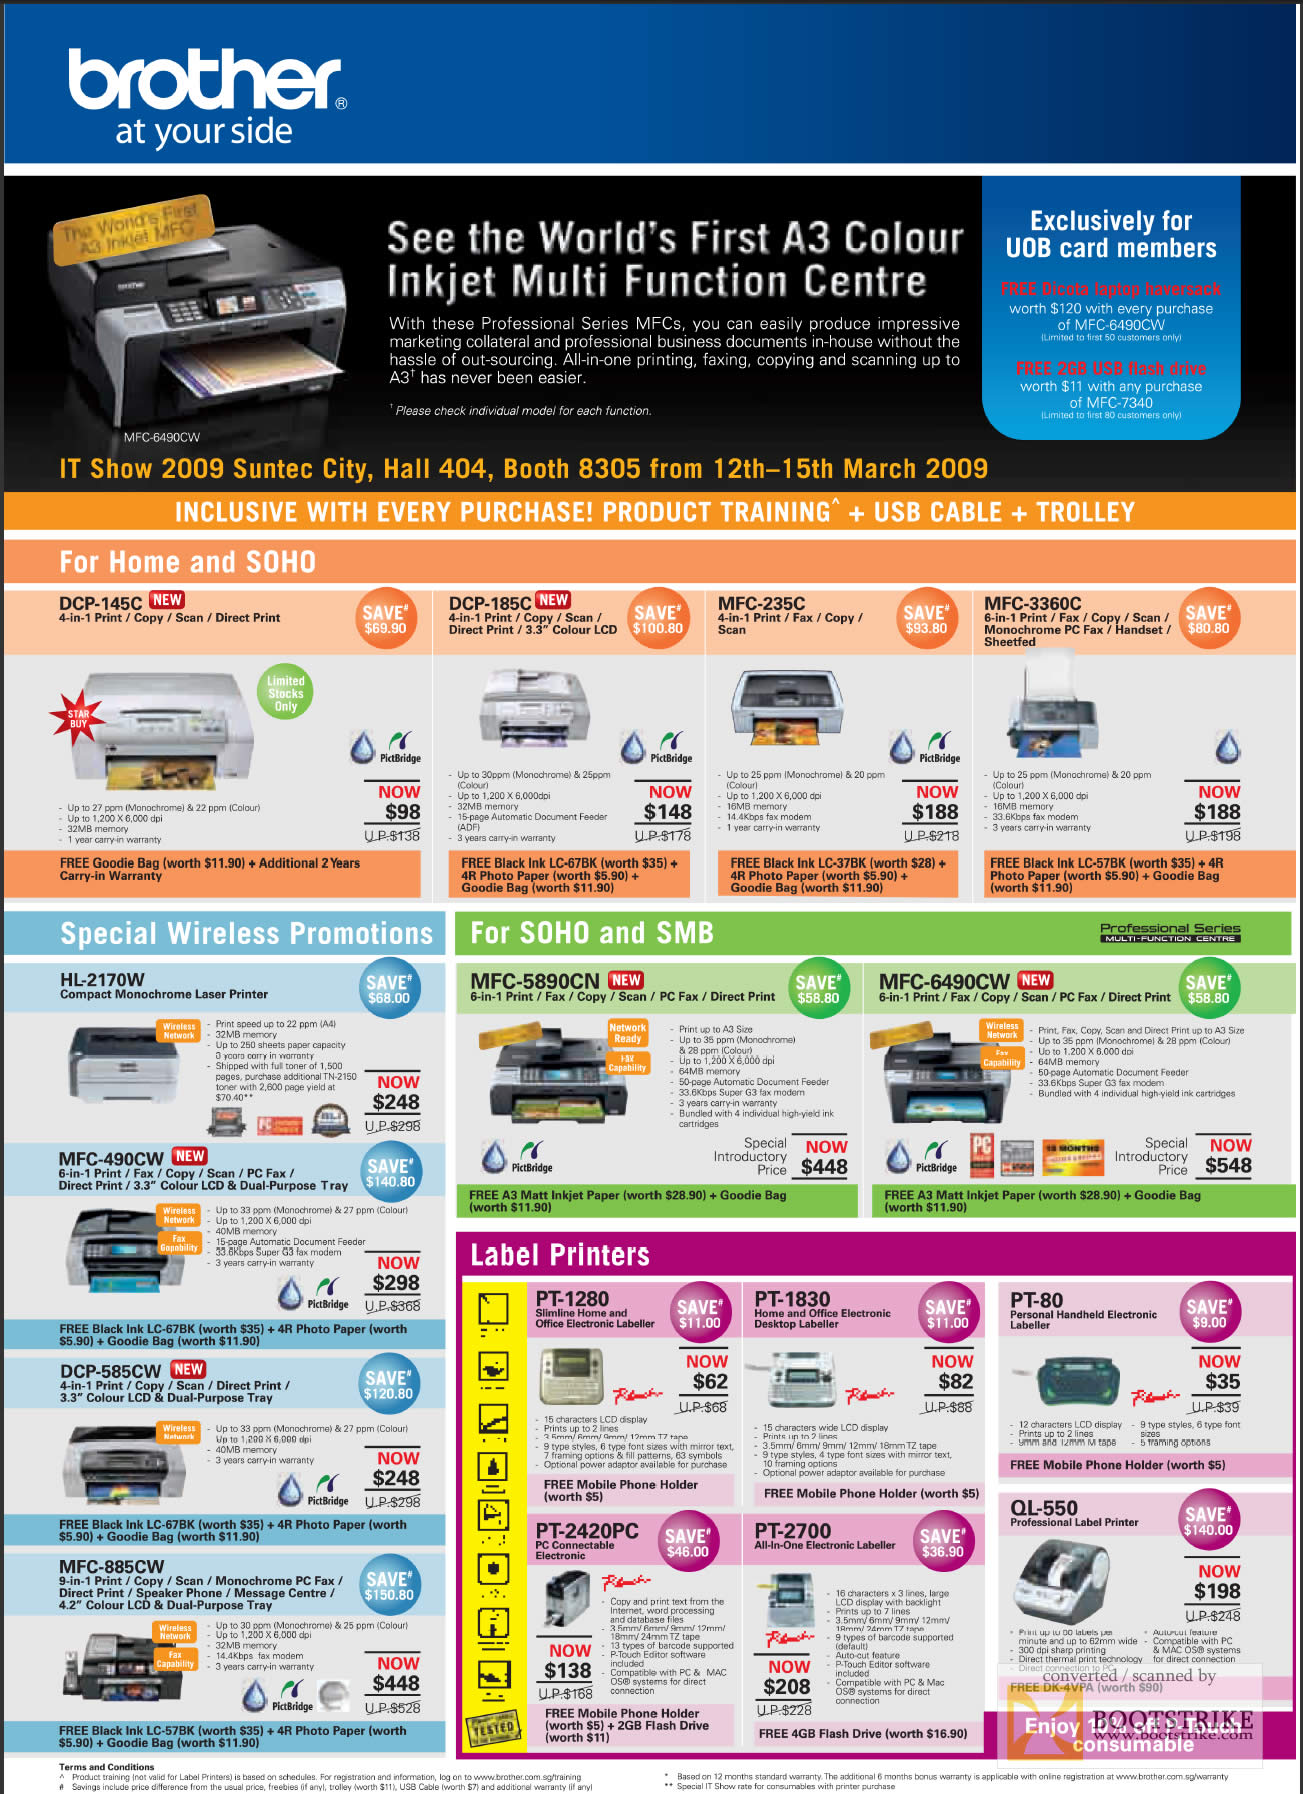 IT Show 2009 price list image brochure of Brother Printers Wireless Label